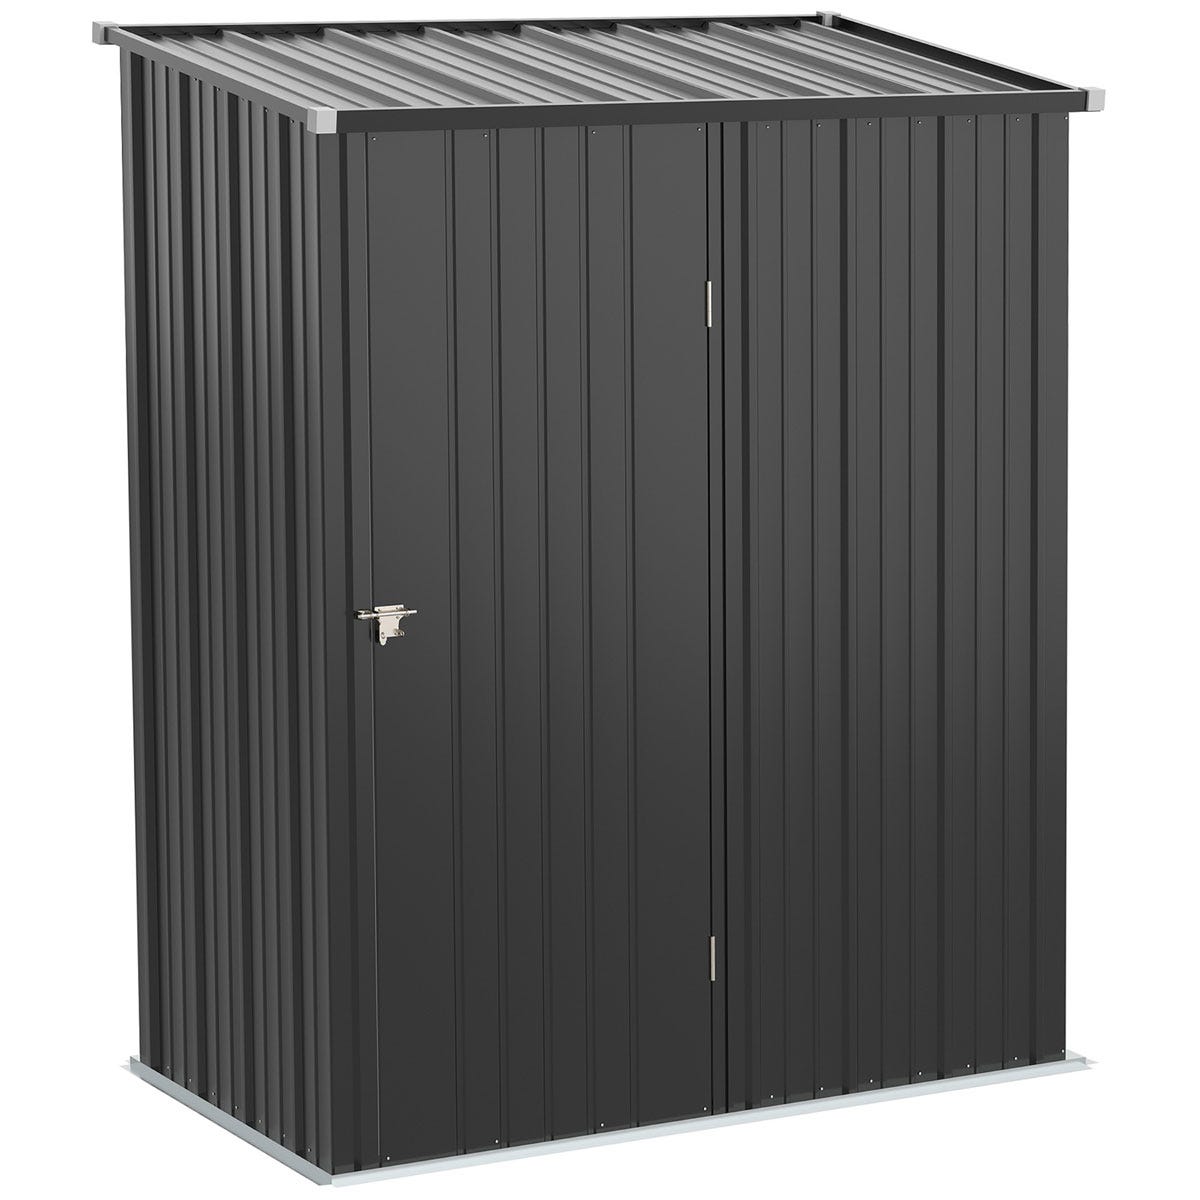 Outsunny 5ft x 3ft Outdoor Storage Shed, Garden Metal Storage Shed with Single Lockable Door, Tool Storage Shed for Backyard, Patio, Lawn, Charcoal Grey